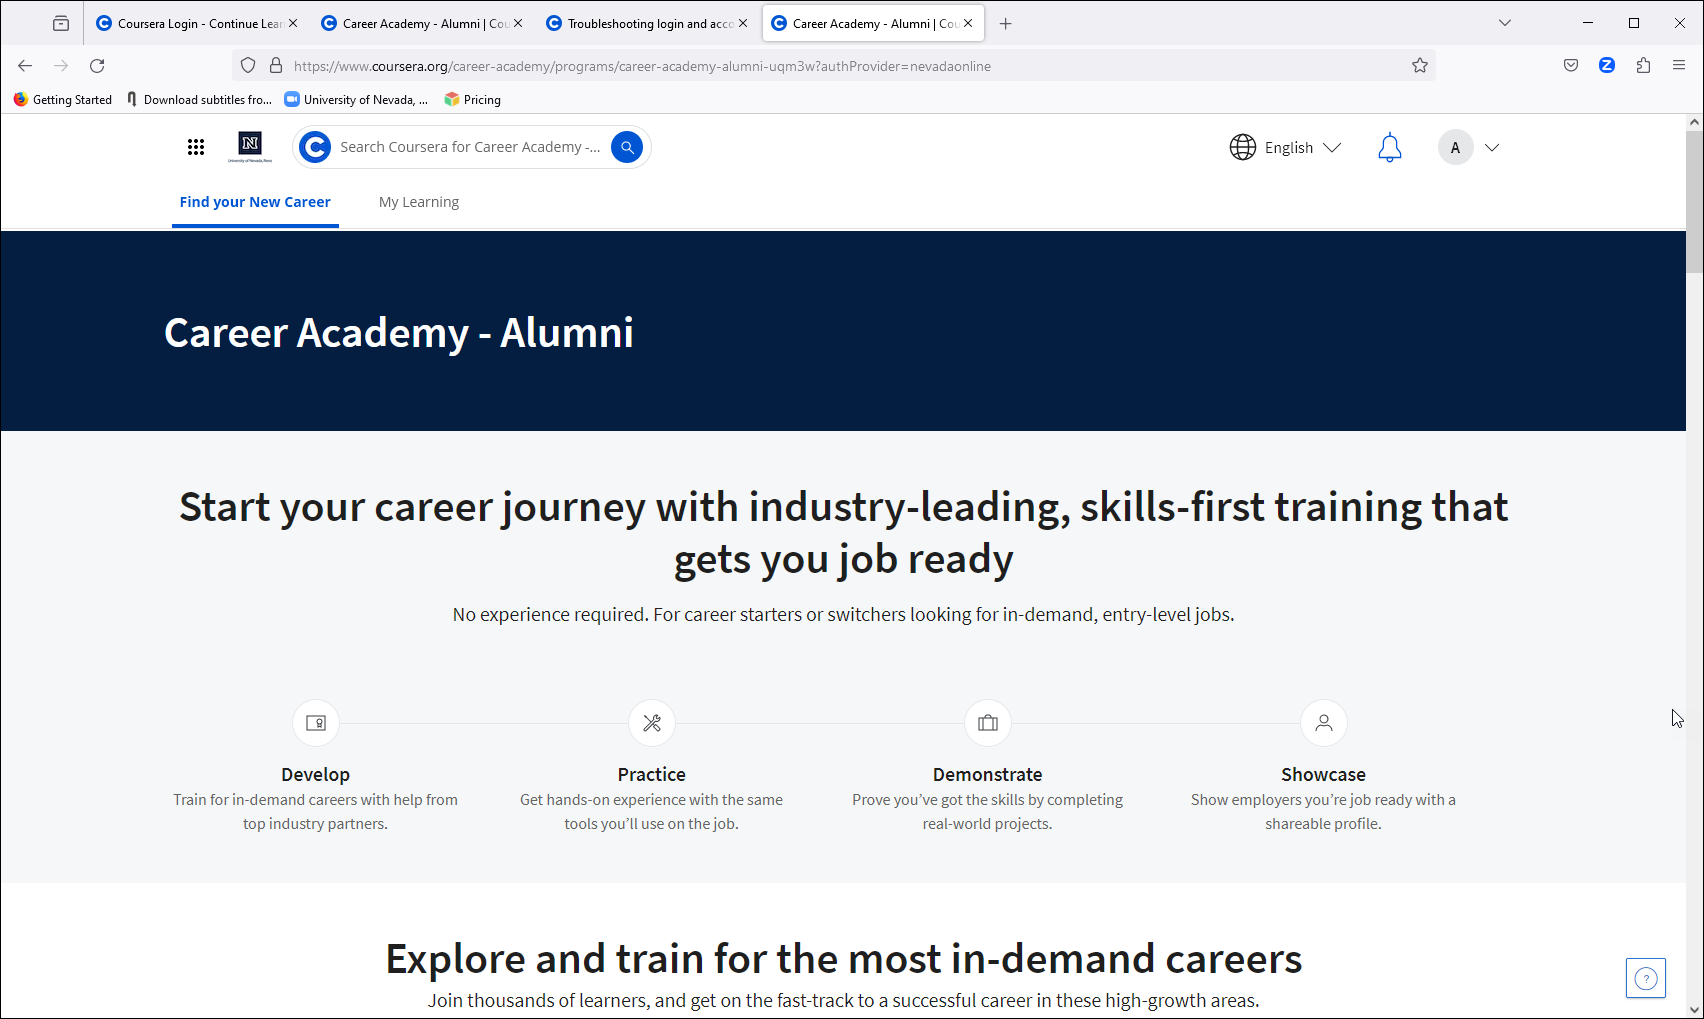 Screen shot of the UNR Coursera Career Academy - Alumni Home Page